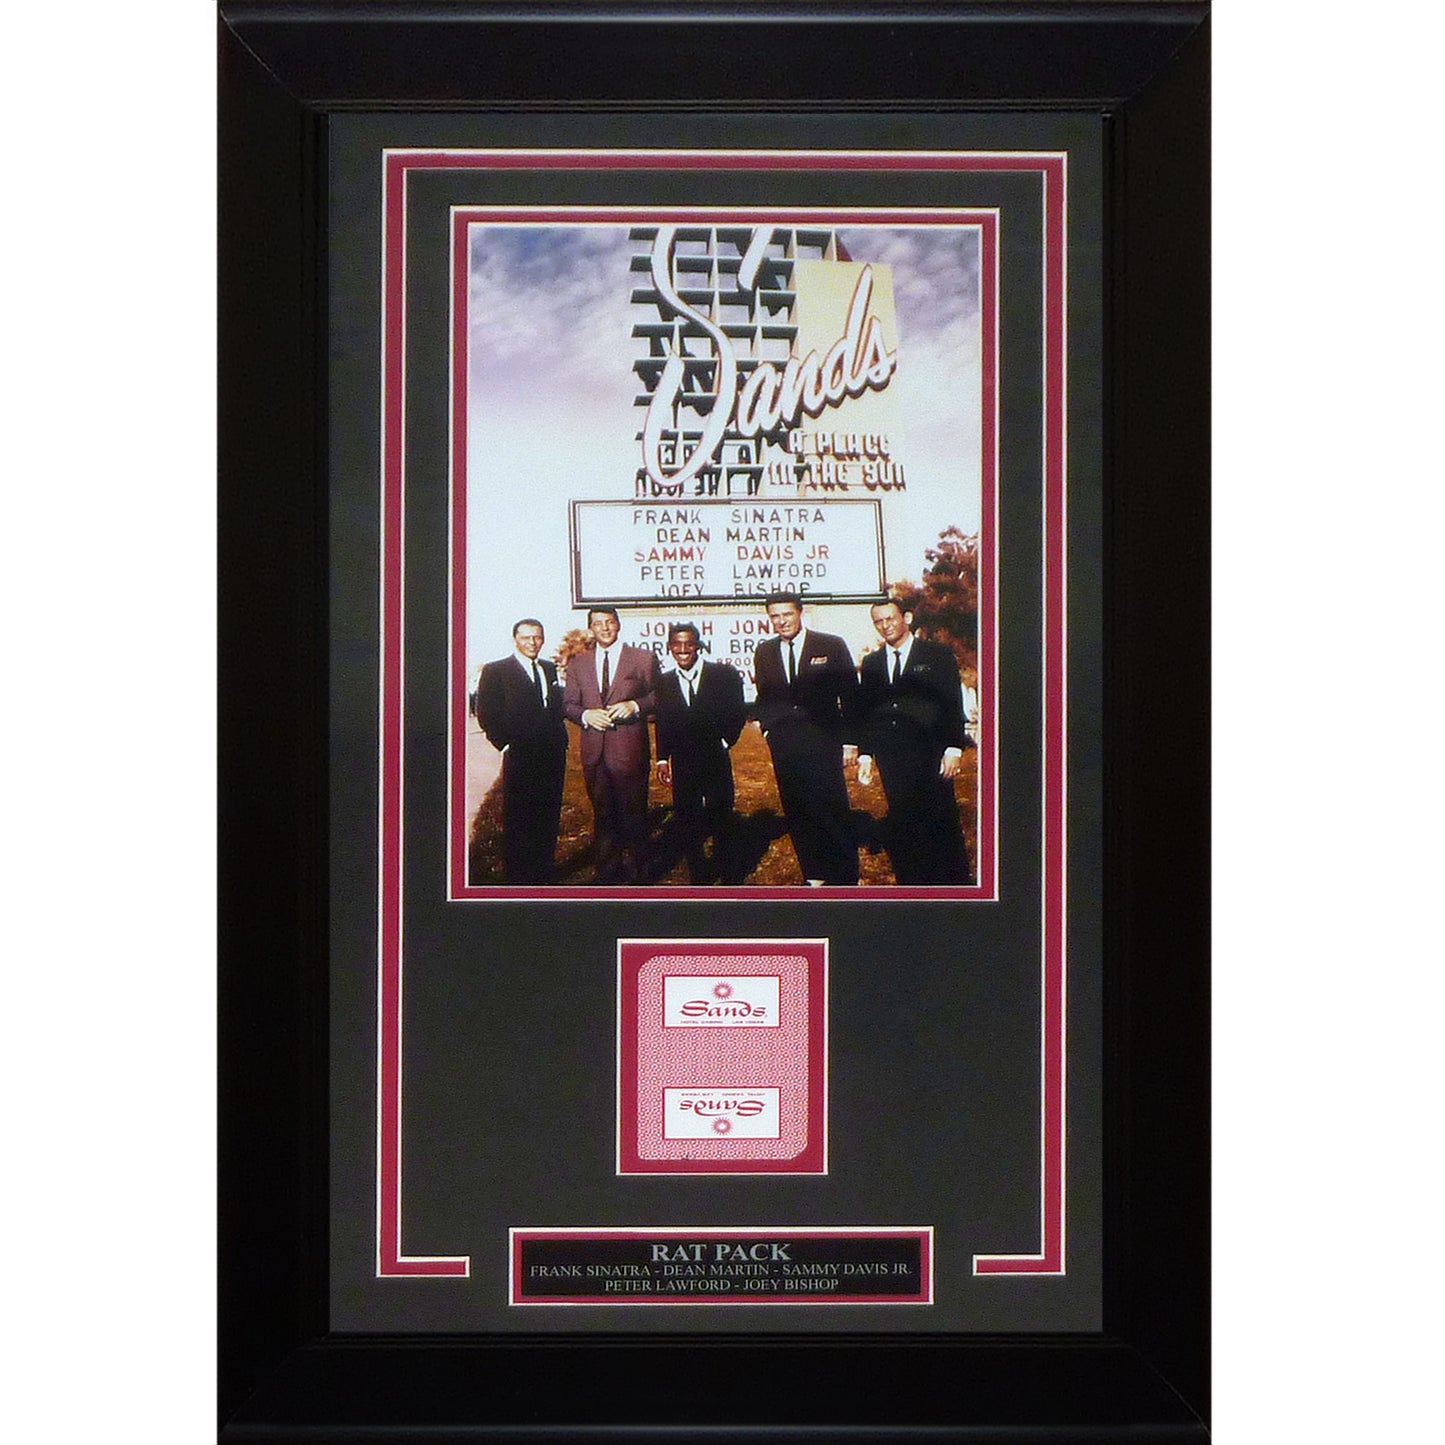 Rat Pack Las Vegas Framed 8x12 Photo with Original Sands Playing Card